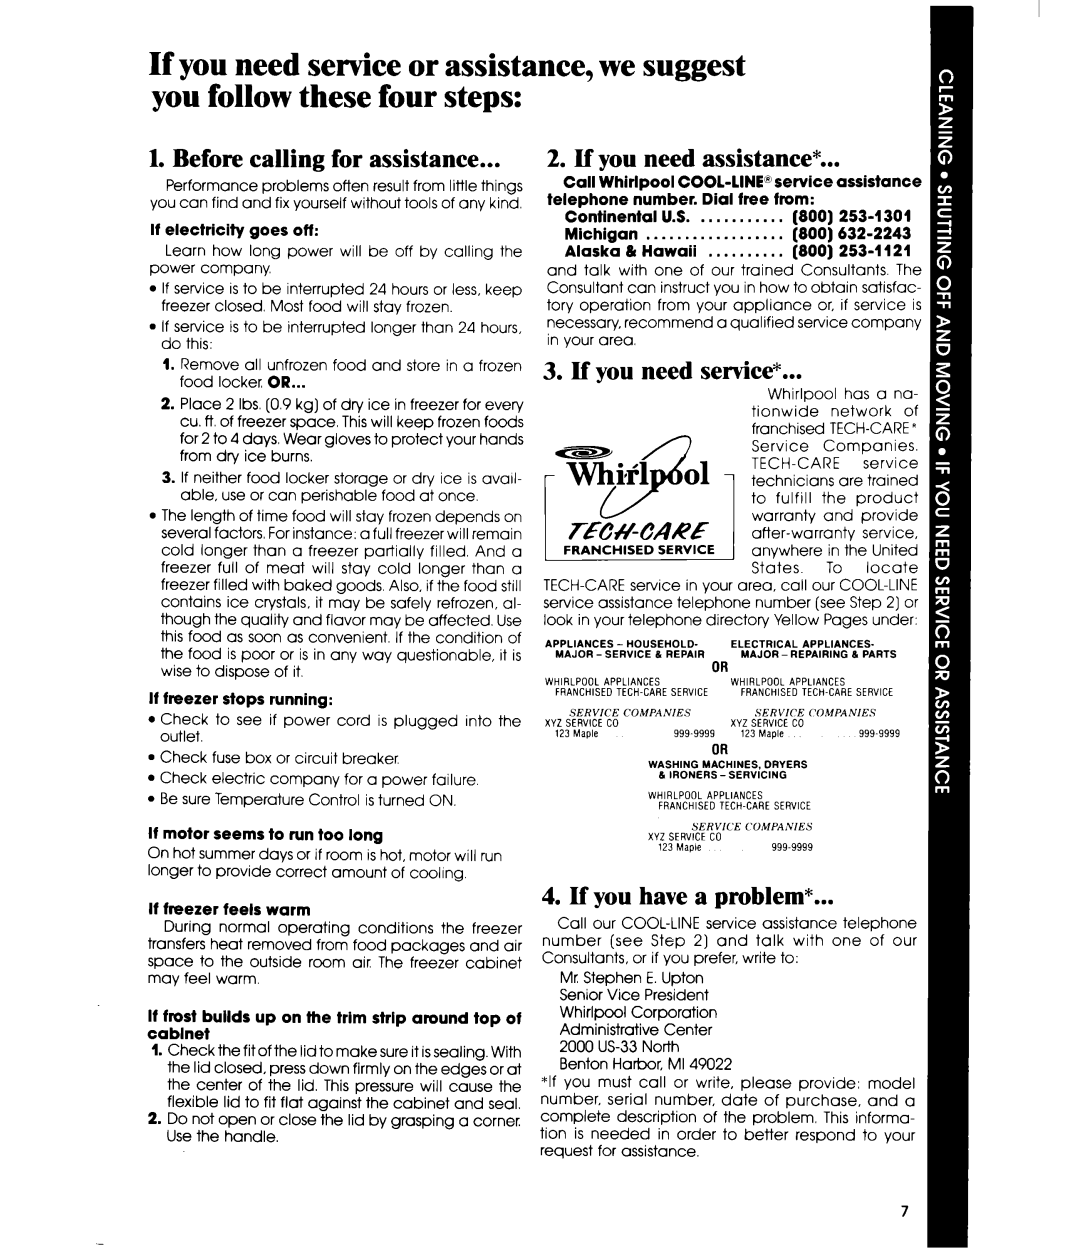 Whirlpool EH1500 manual Before calling for assistance, If you need assistance, lf you need service, If you have a problem 